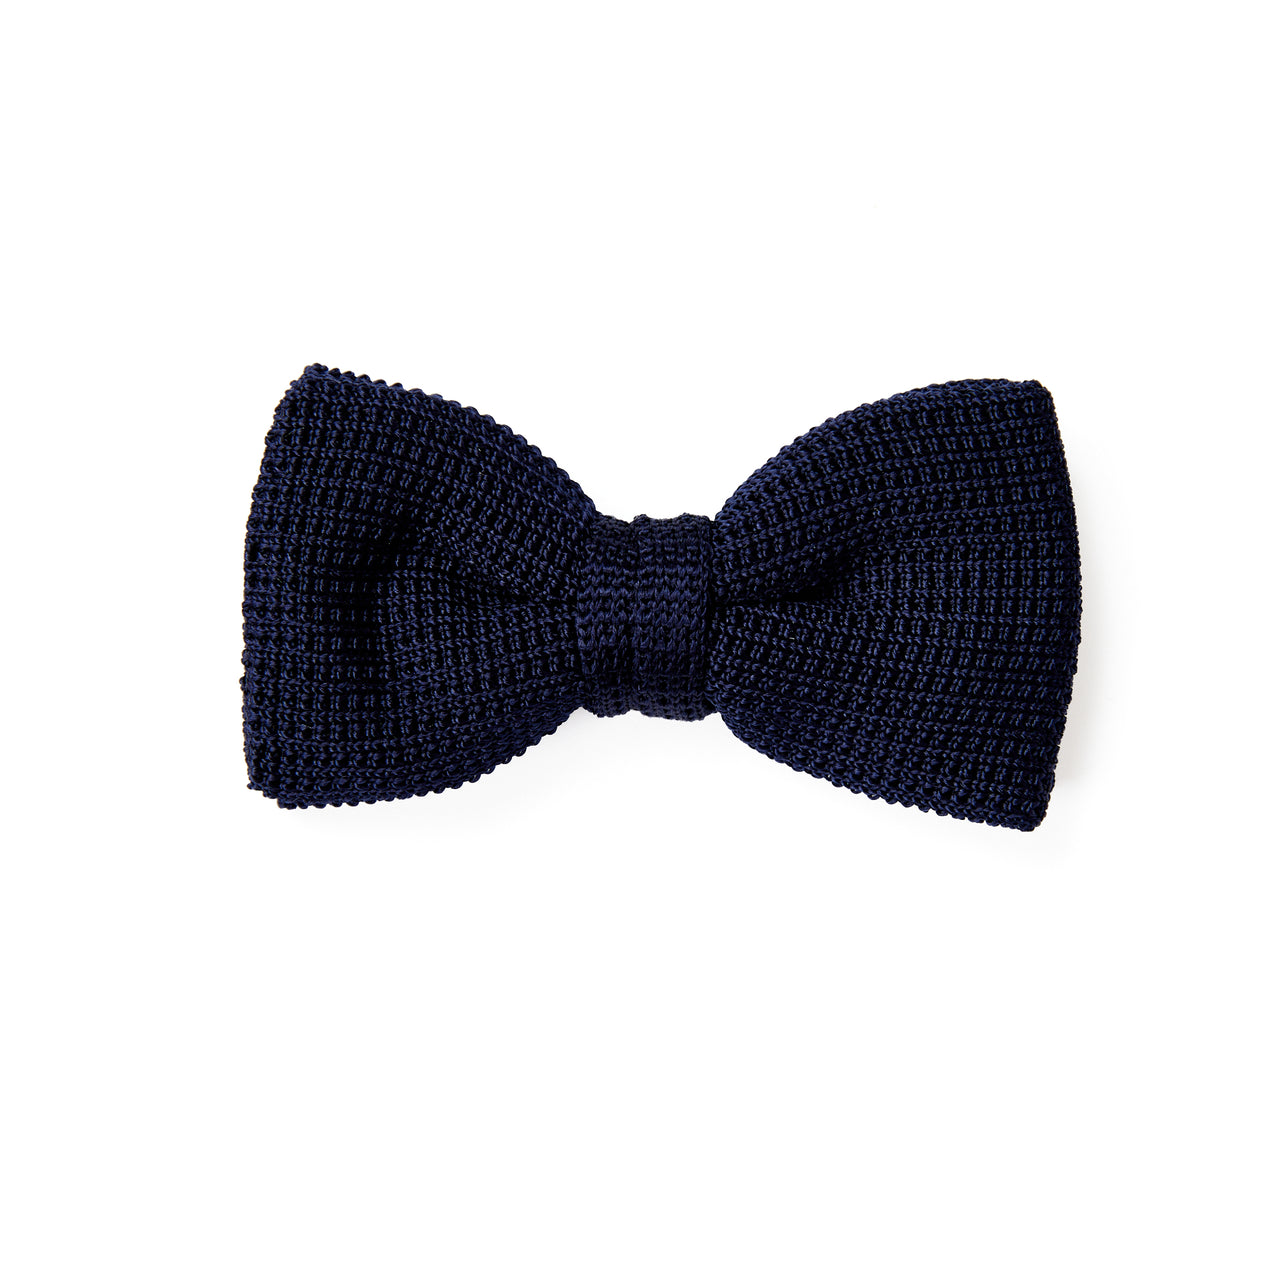 HENRY SARTORIAL x HEMLEY Knitted Bow Tie NAVY